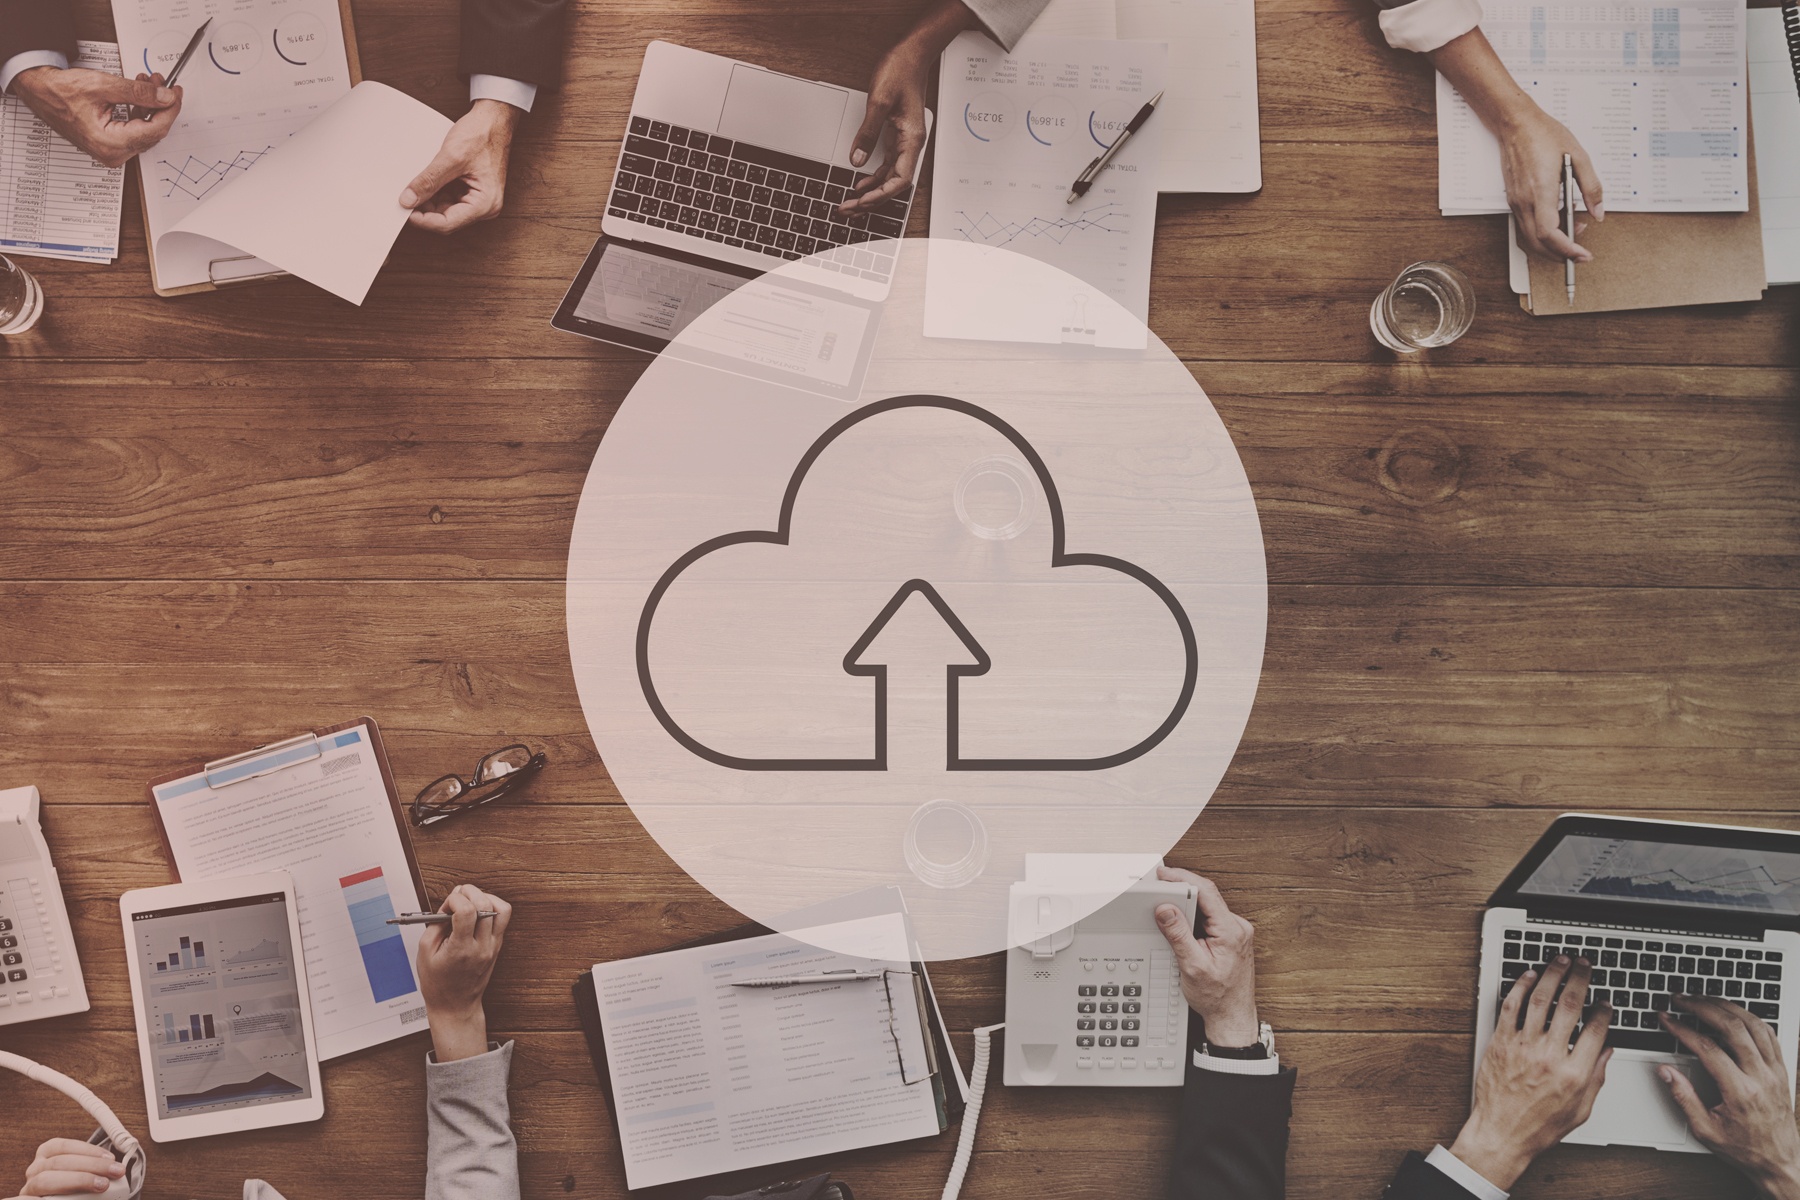 PioTech Group can help you find effective cloud solutions to fit your business needs 